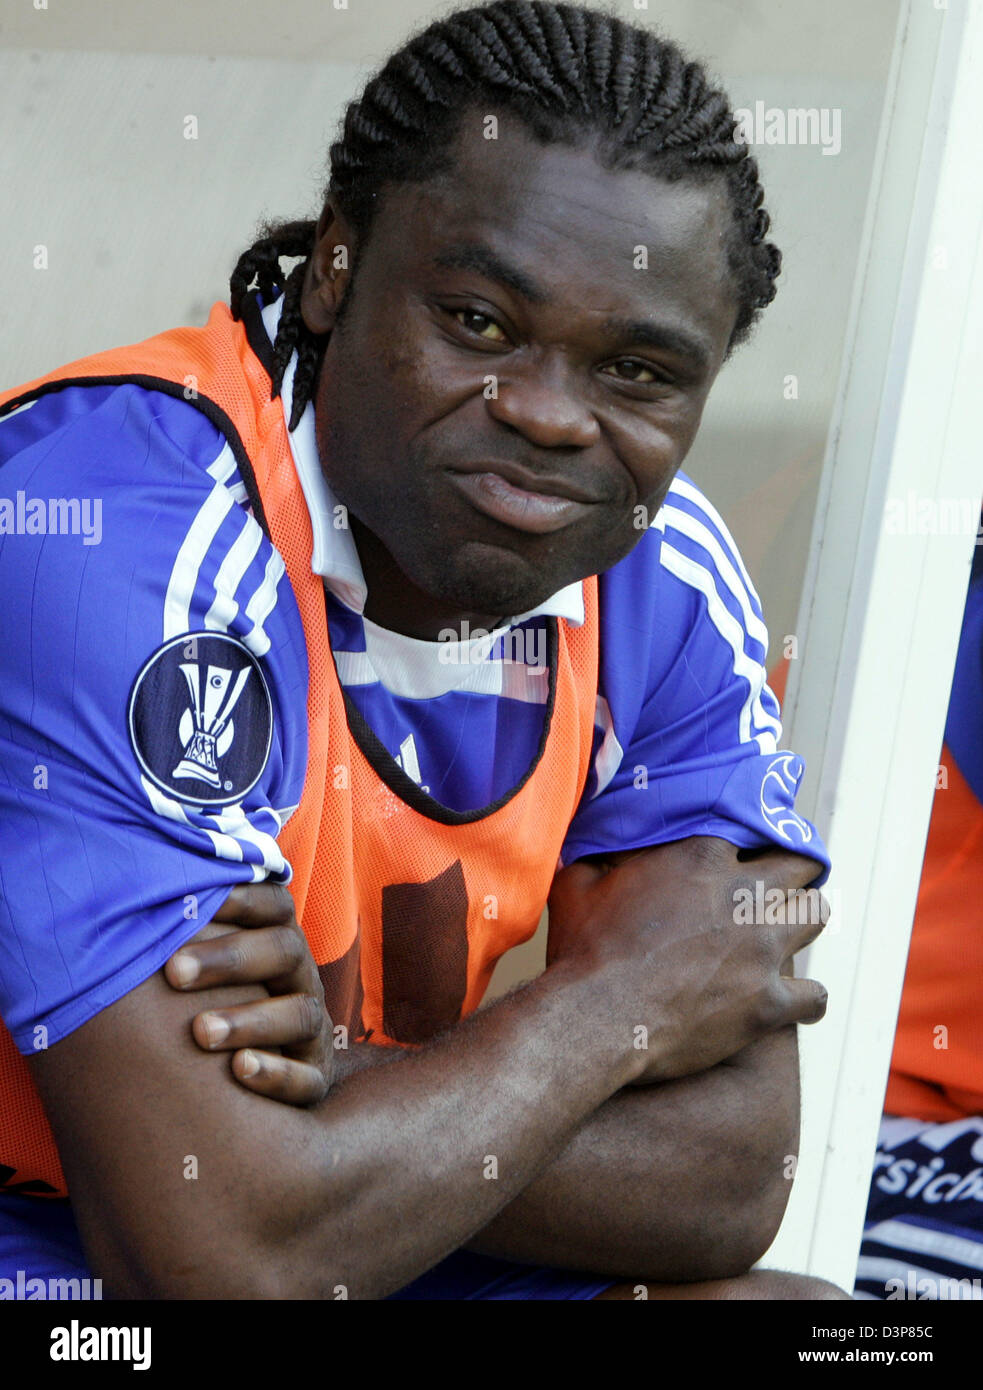 Geral Asamoah of Schalke sits on the substitute bench before the UEFA Cup prelim match AS Nancy Lorraine vs FC Schalke 04 in Nancy, France, Thursday, 28 September 2006. The German international was rudely attacked by Nancy's Pape Diakhata 20 minutes after his entrance breaking his shin and lower leg. Schalke was defeated 1-3 failing to move up to the group phase. Photo: Bernd Thiss Stock Photo